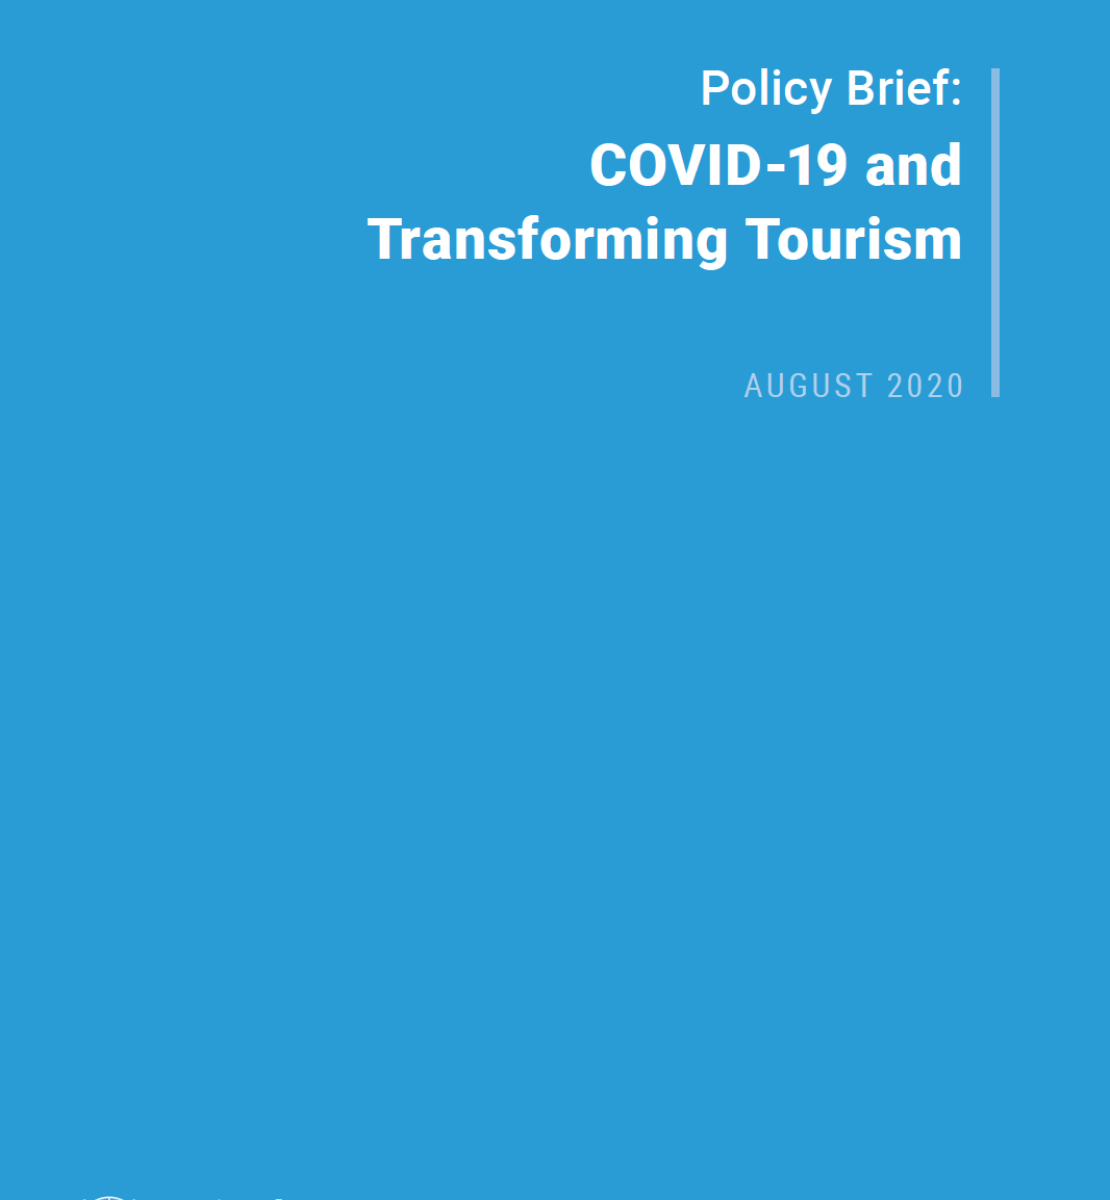 Cover shows the title "Policy Brief: COVID-19 and Transforming Tourism" against a solid blue background with the UN emblem on the lower left side.